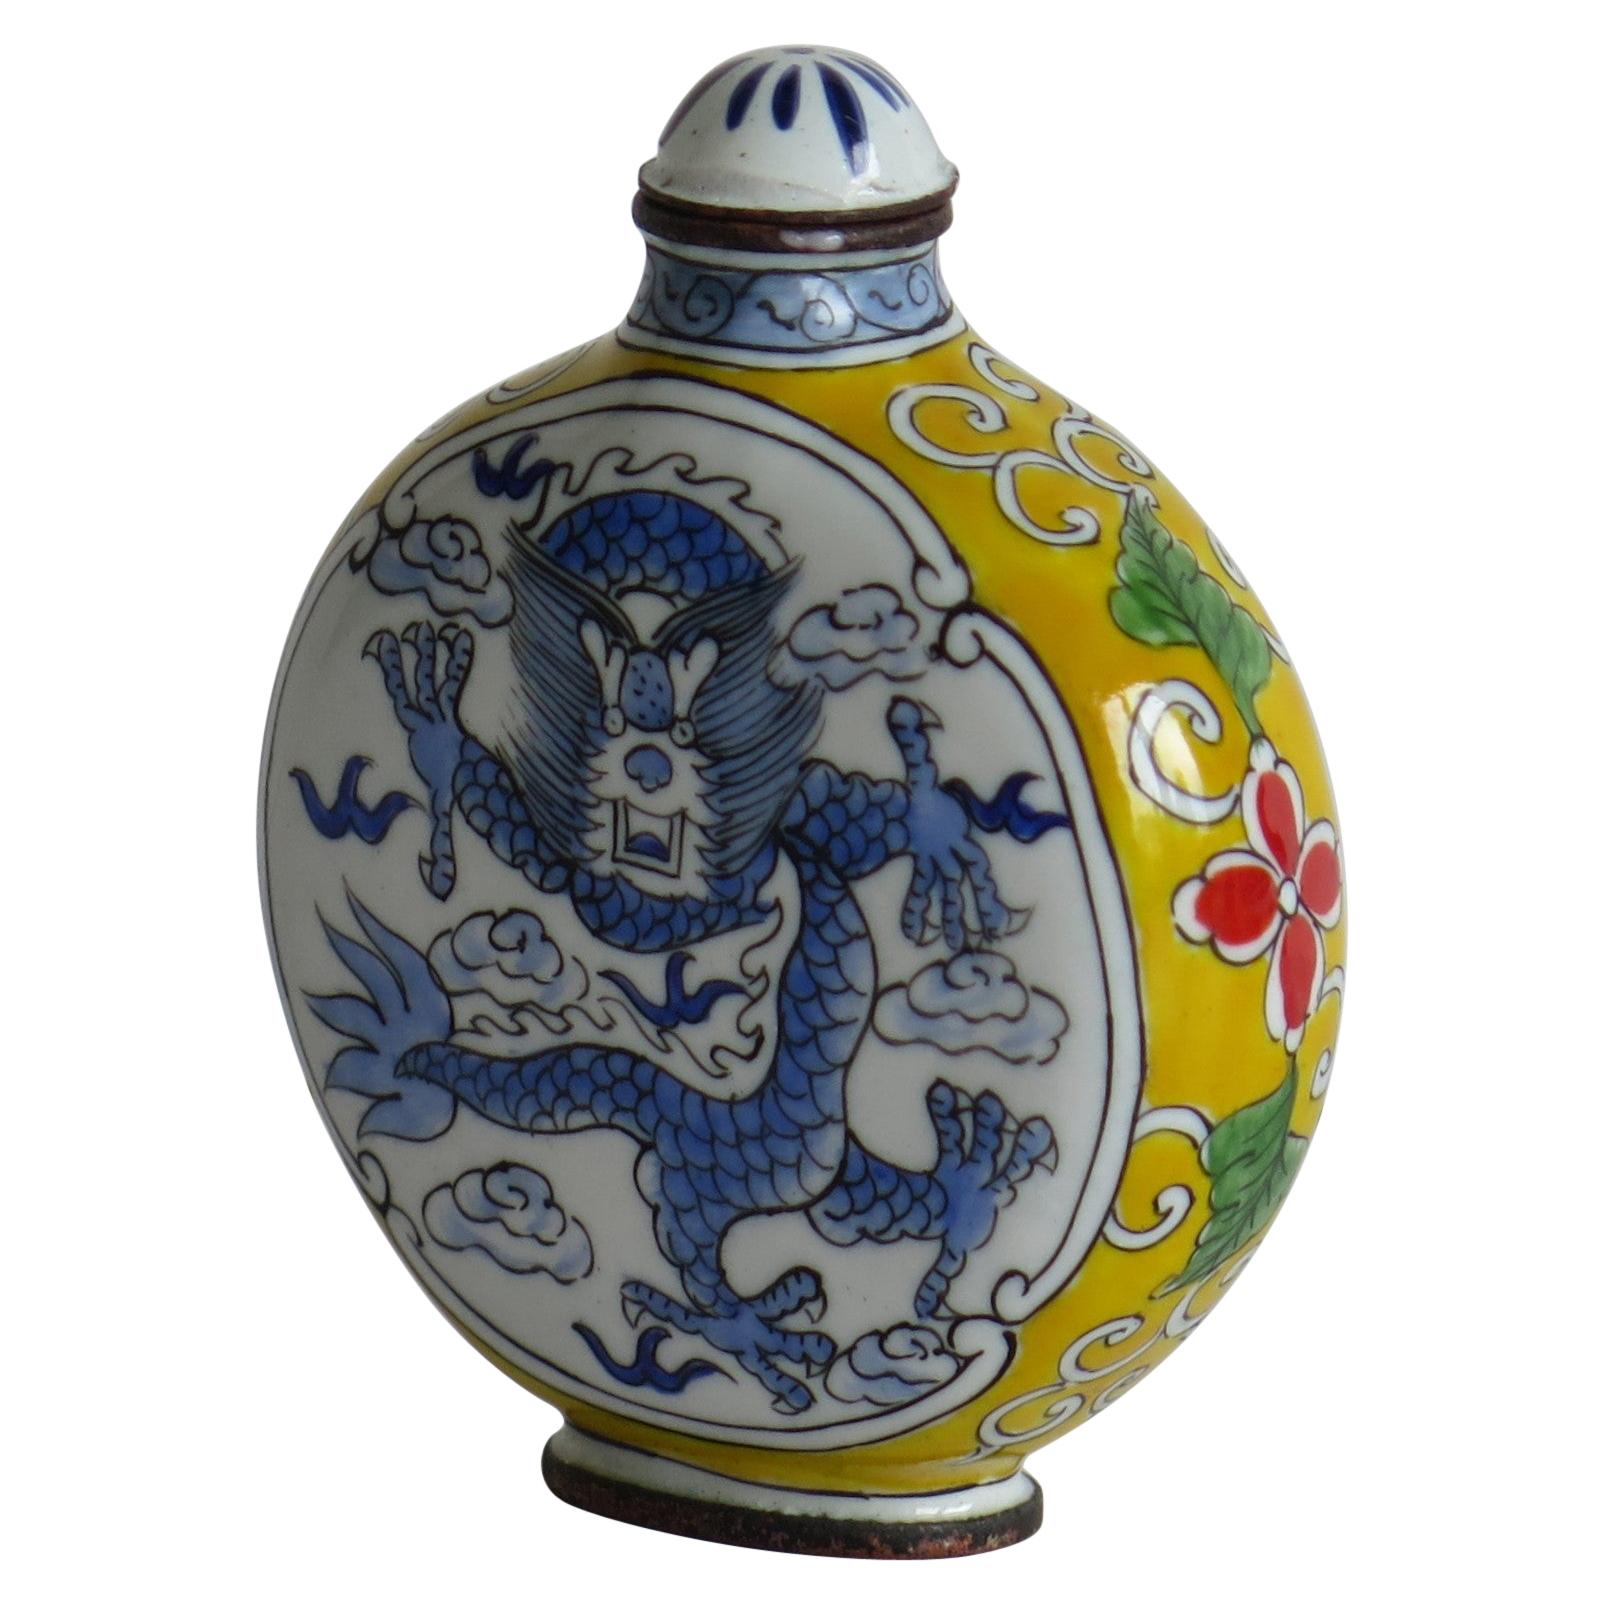 Details about   Chinese Old Marked Enamel Colored Swine Gilt Porcelain Snuff Bottle 